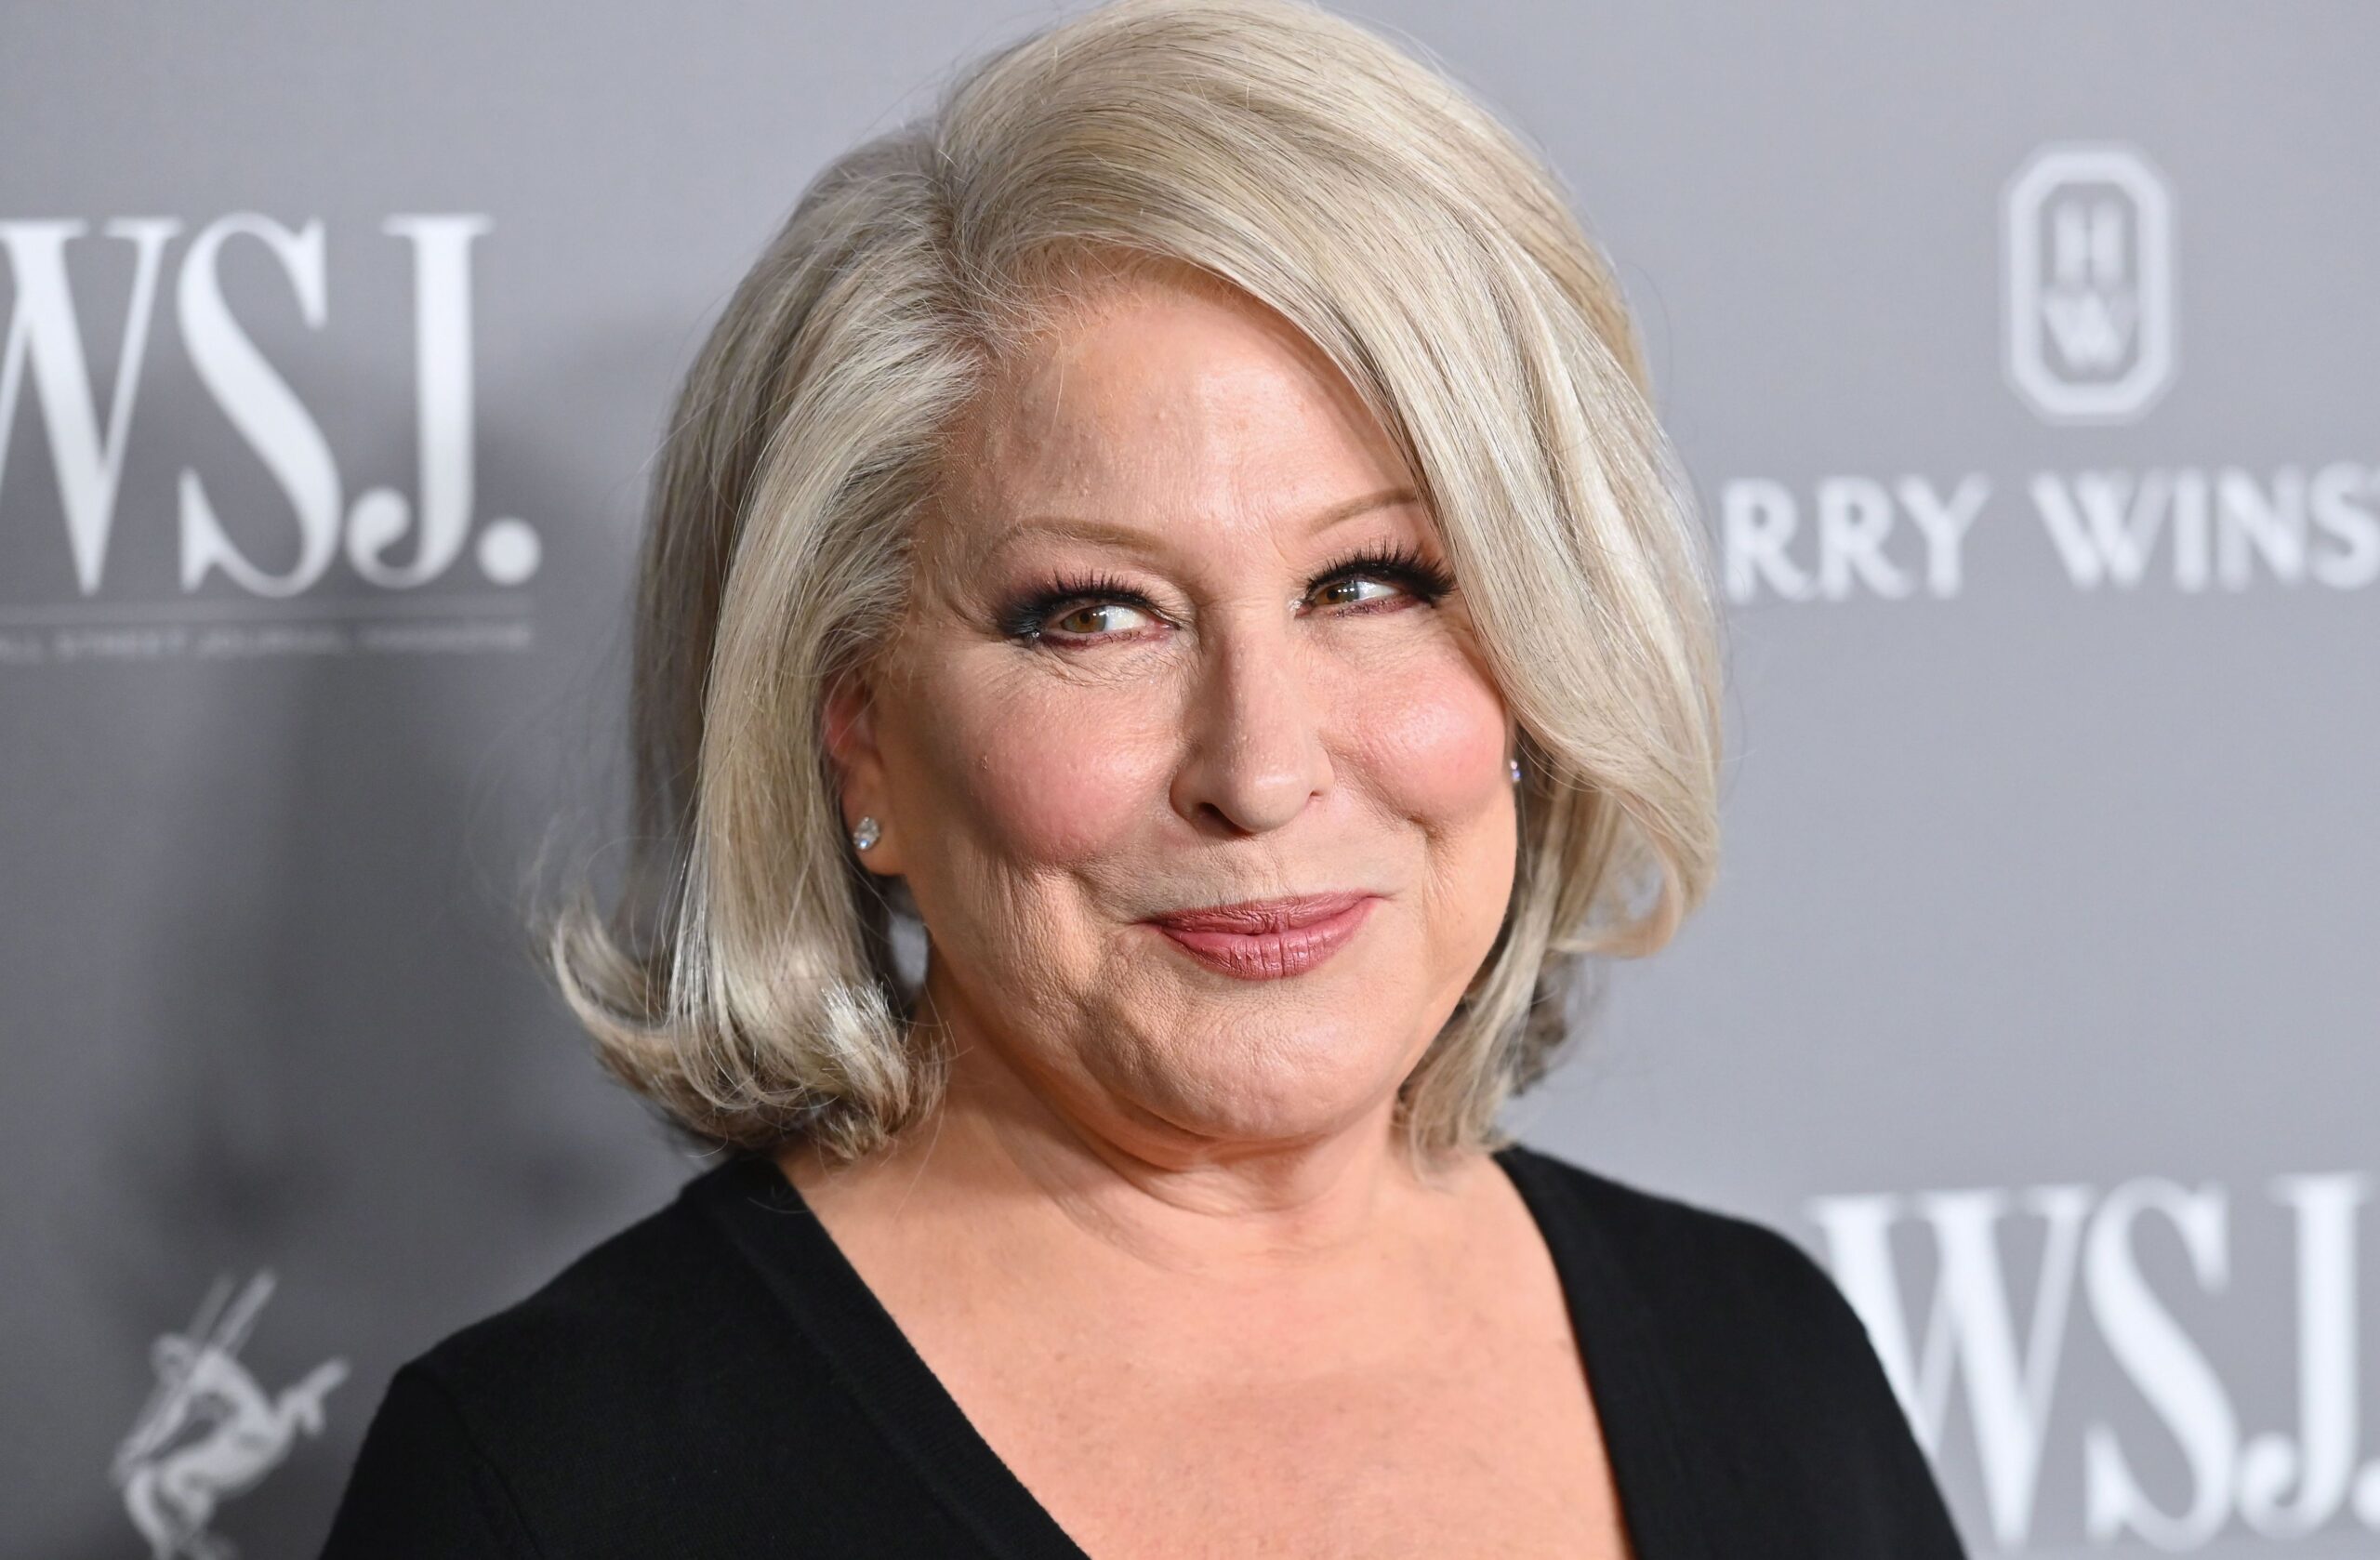 Try Breastfeeding Its Free Bette Midler Annihilated For Snarky Tweet Amid Baby Formula Shortage